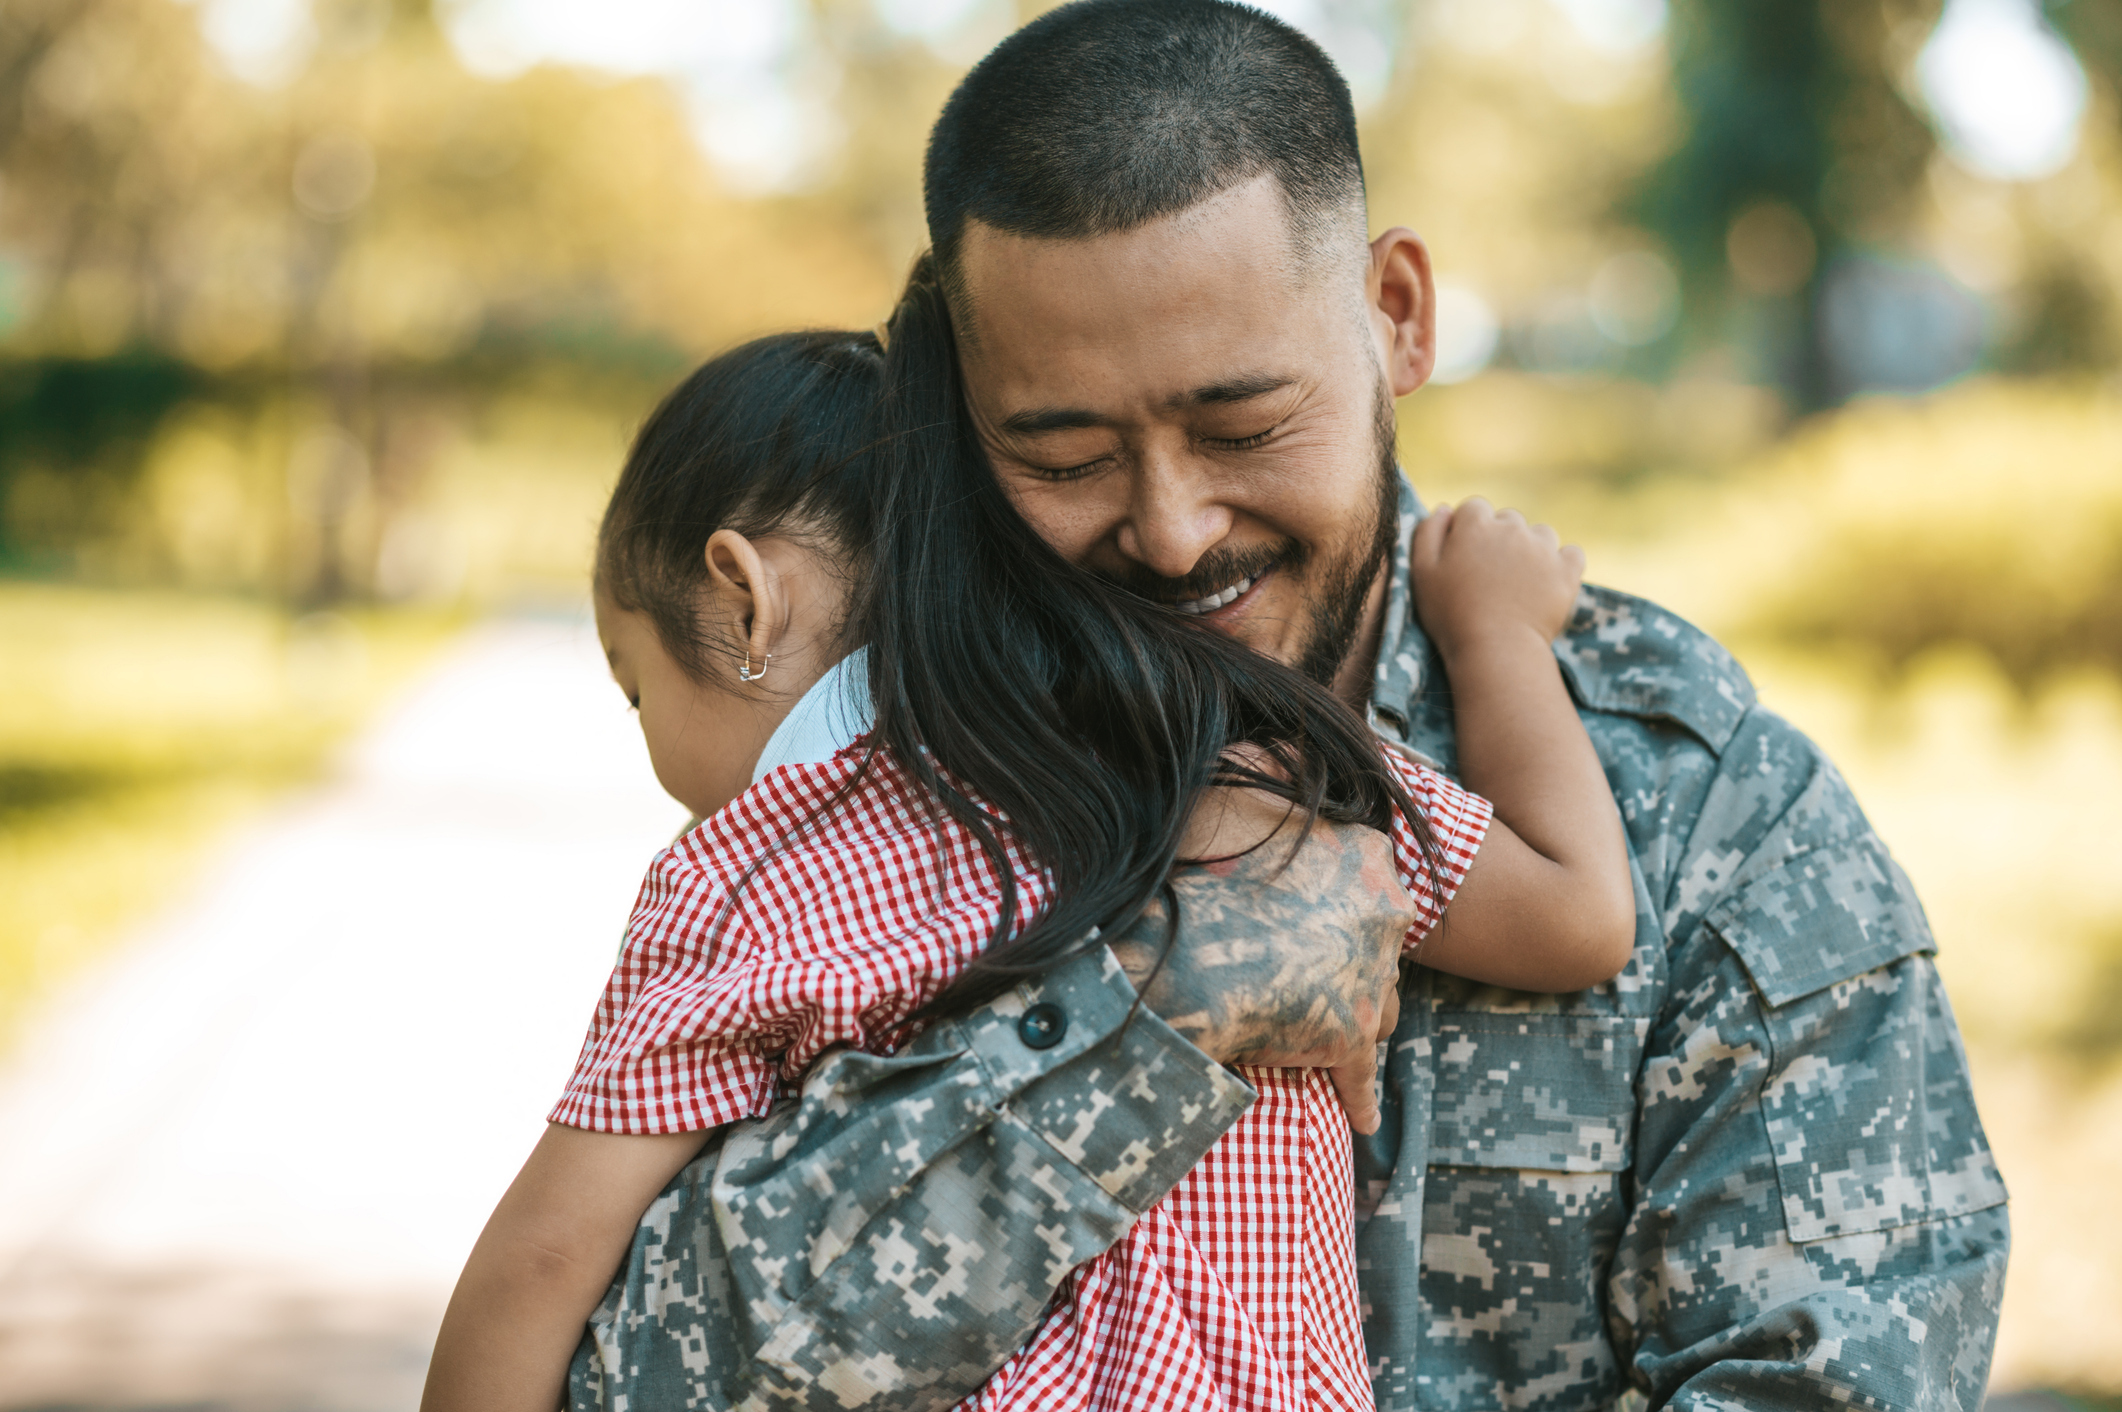 Man in military fatigues smiling while embracing young girl